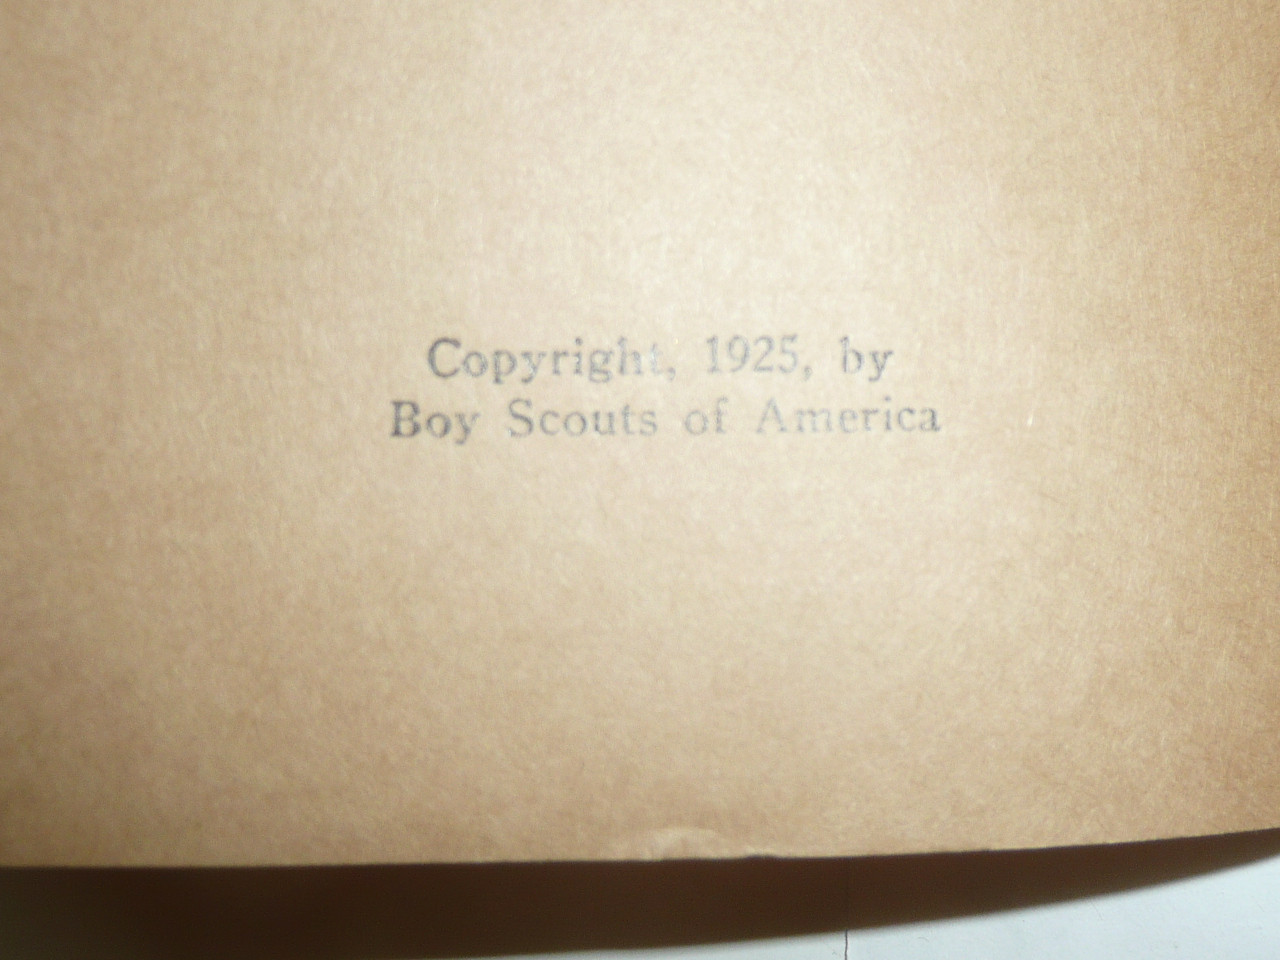 Leatherworking Merit Badge Pamphlet, Type 3, Tan Cover, 1925 Printing, Mint Condition